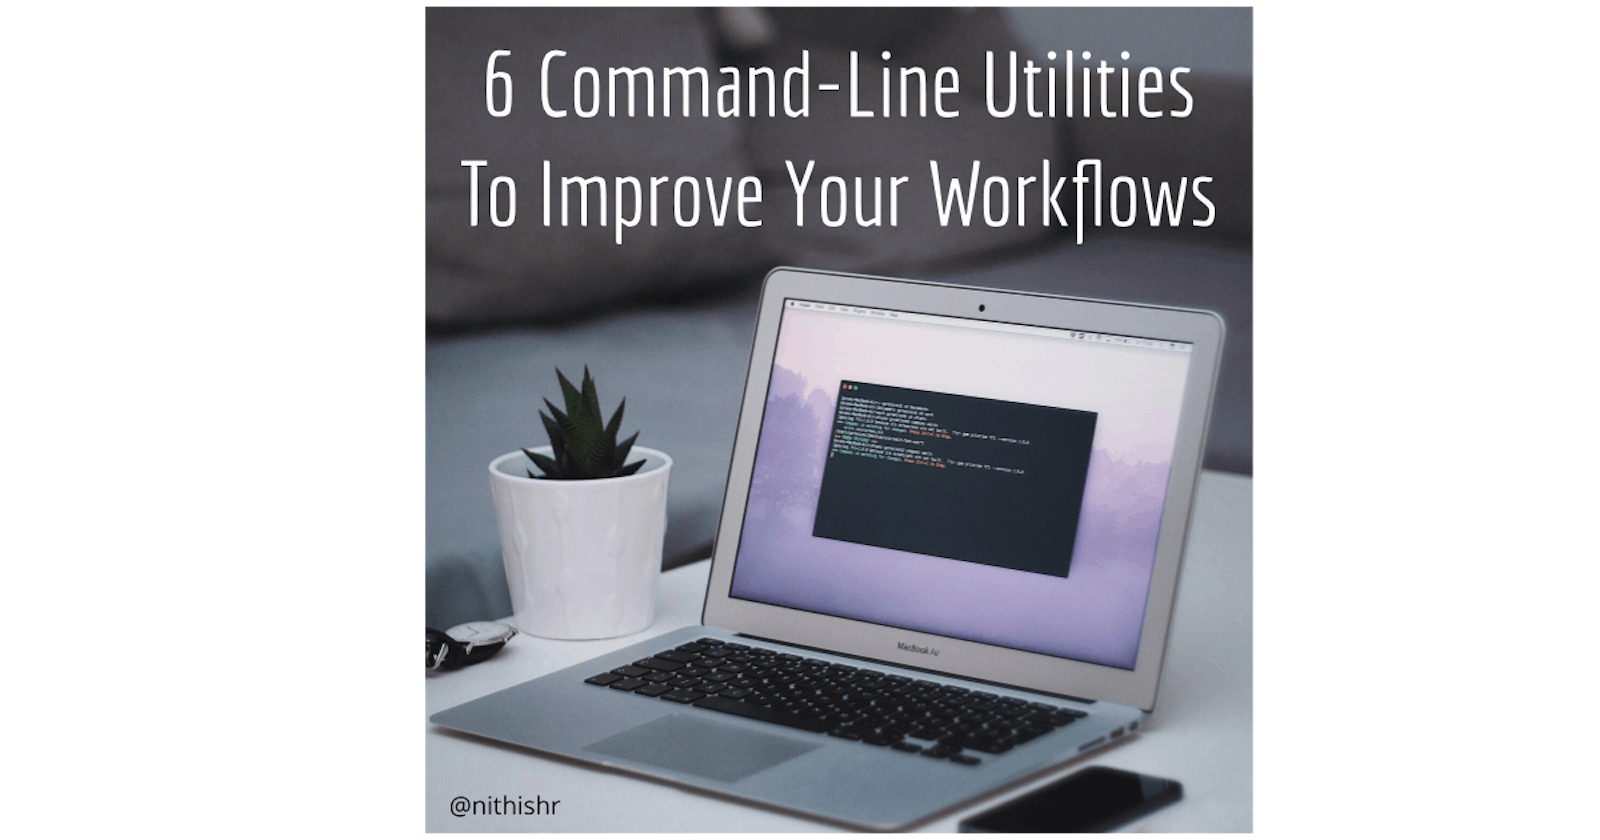 6 Command-line Utilities to Improve your Workflows